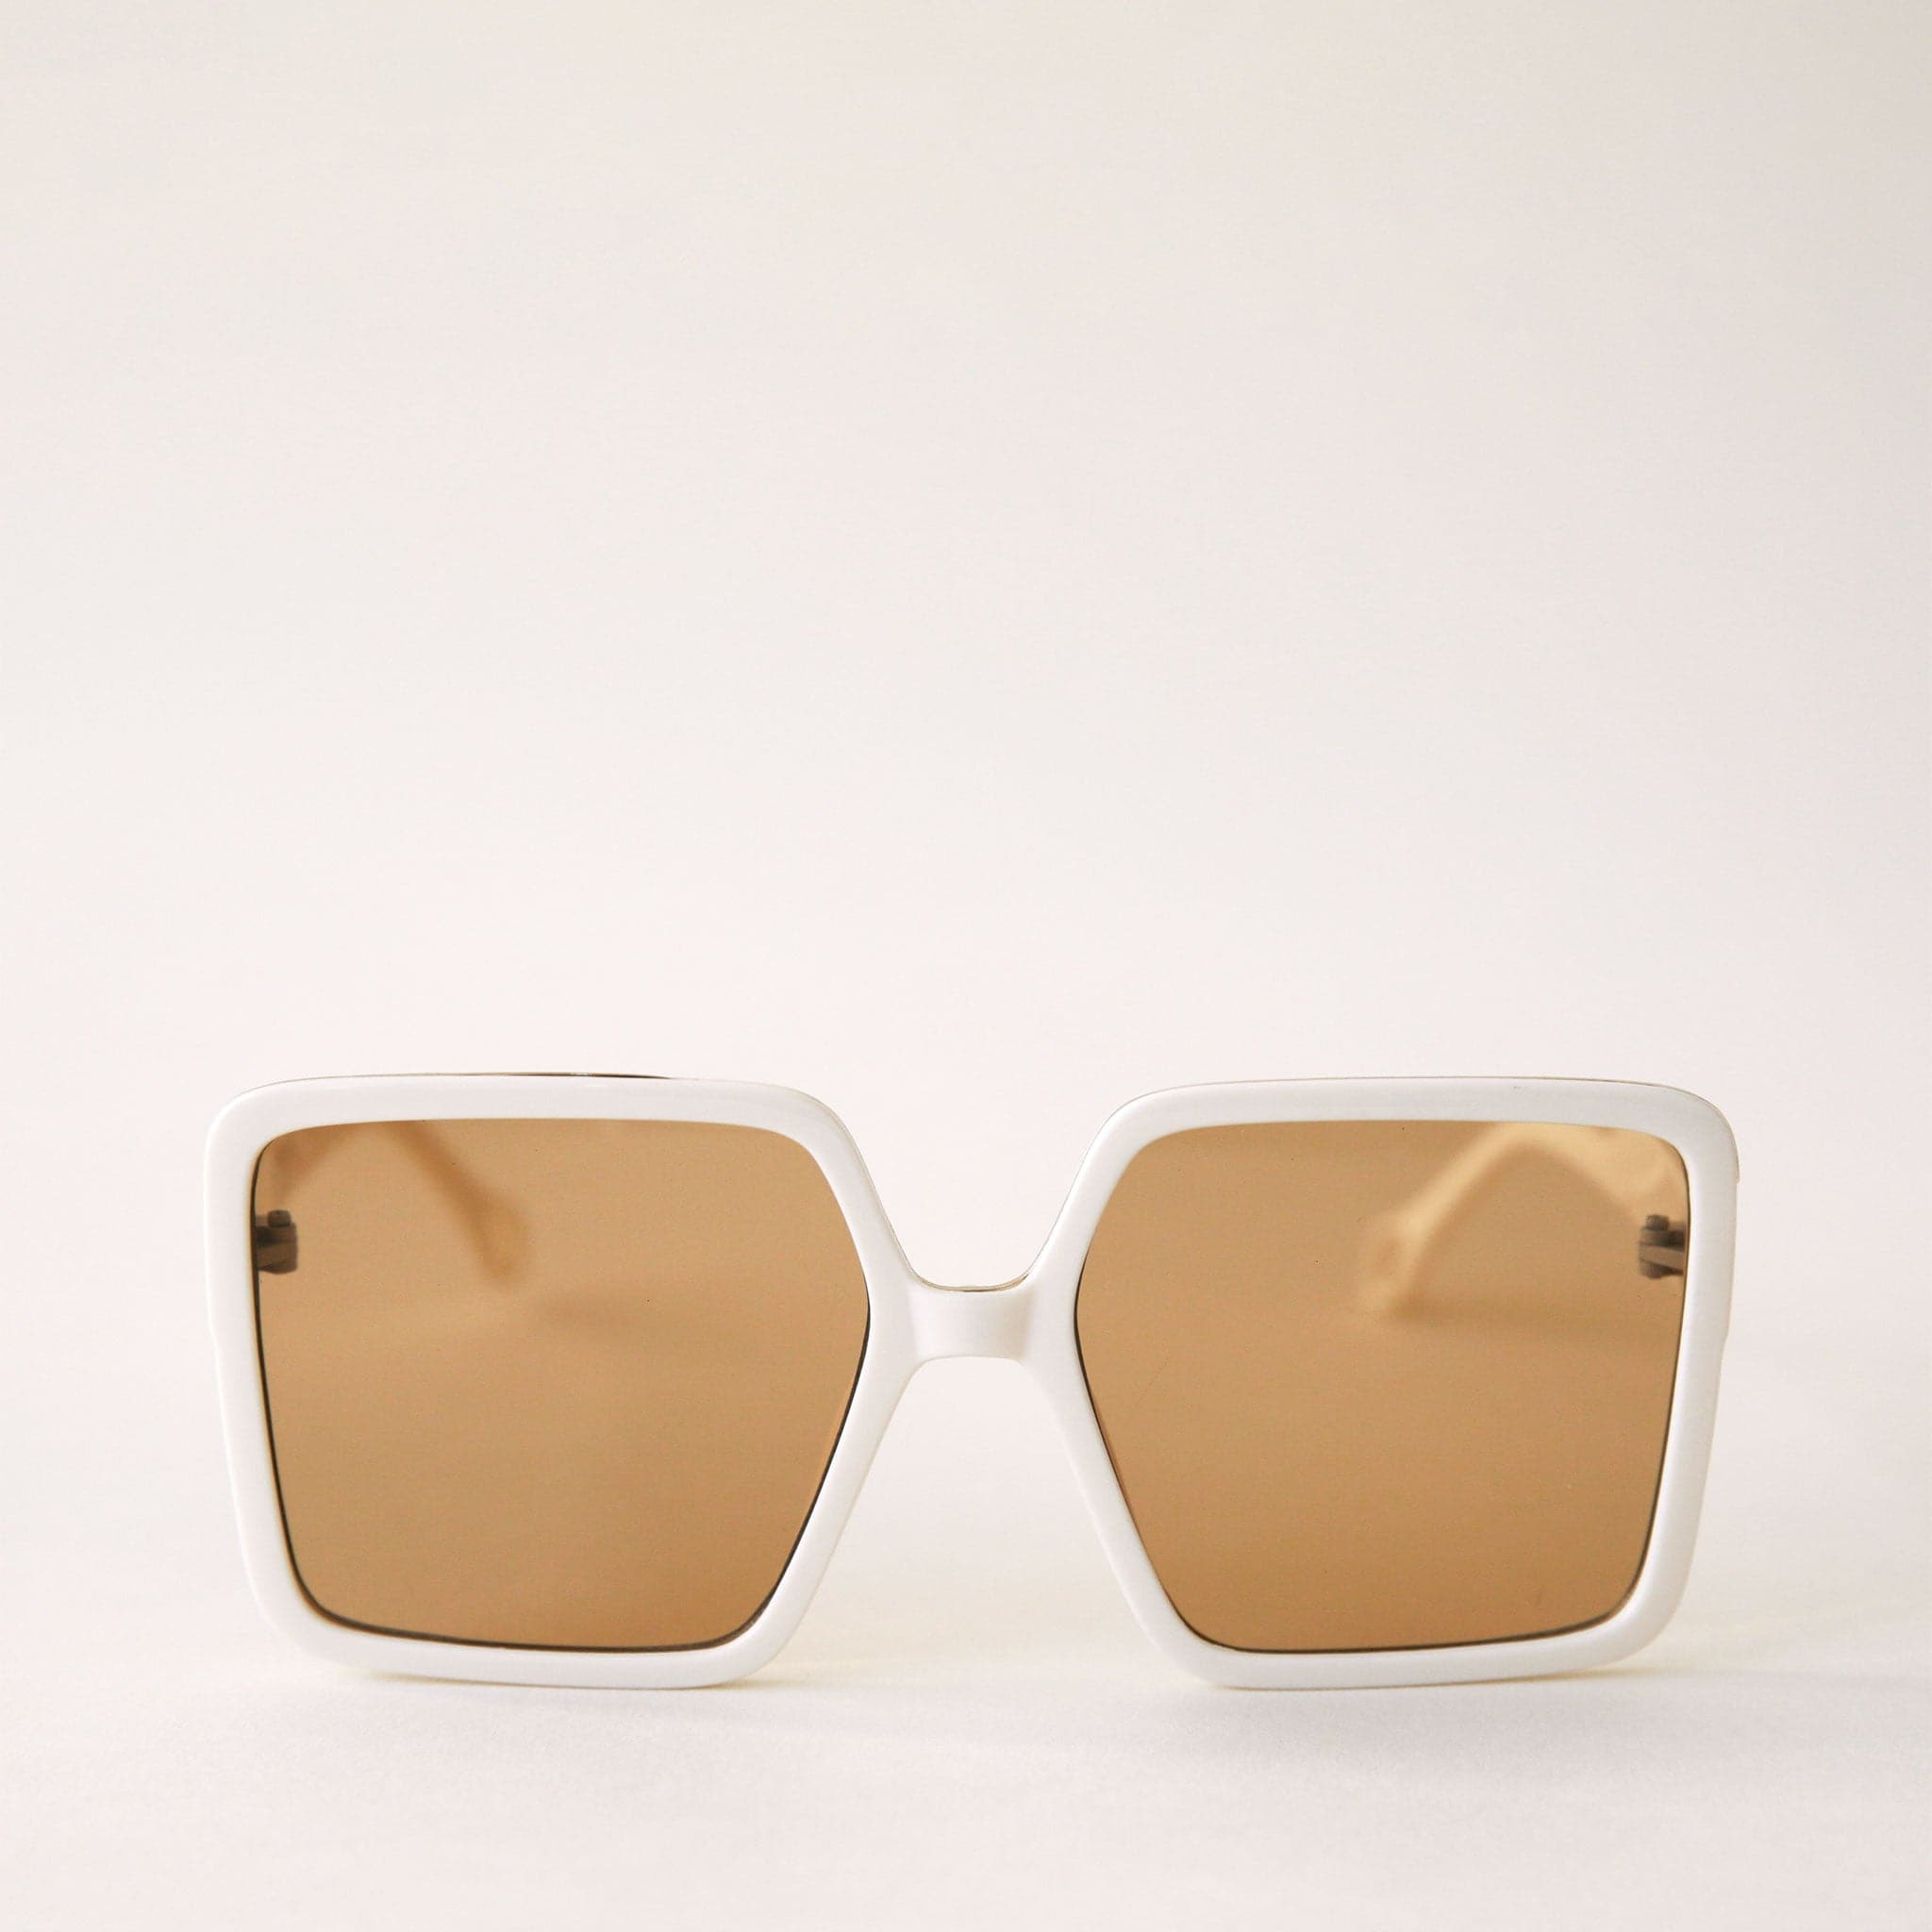 70's inspired square sunglasses with an oversized white frame and amber colored lenses.